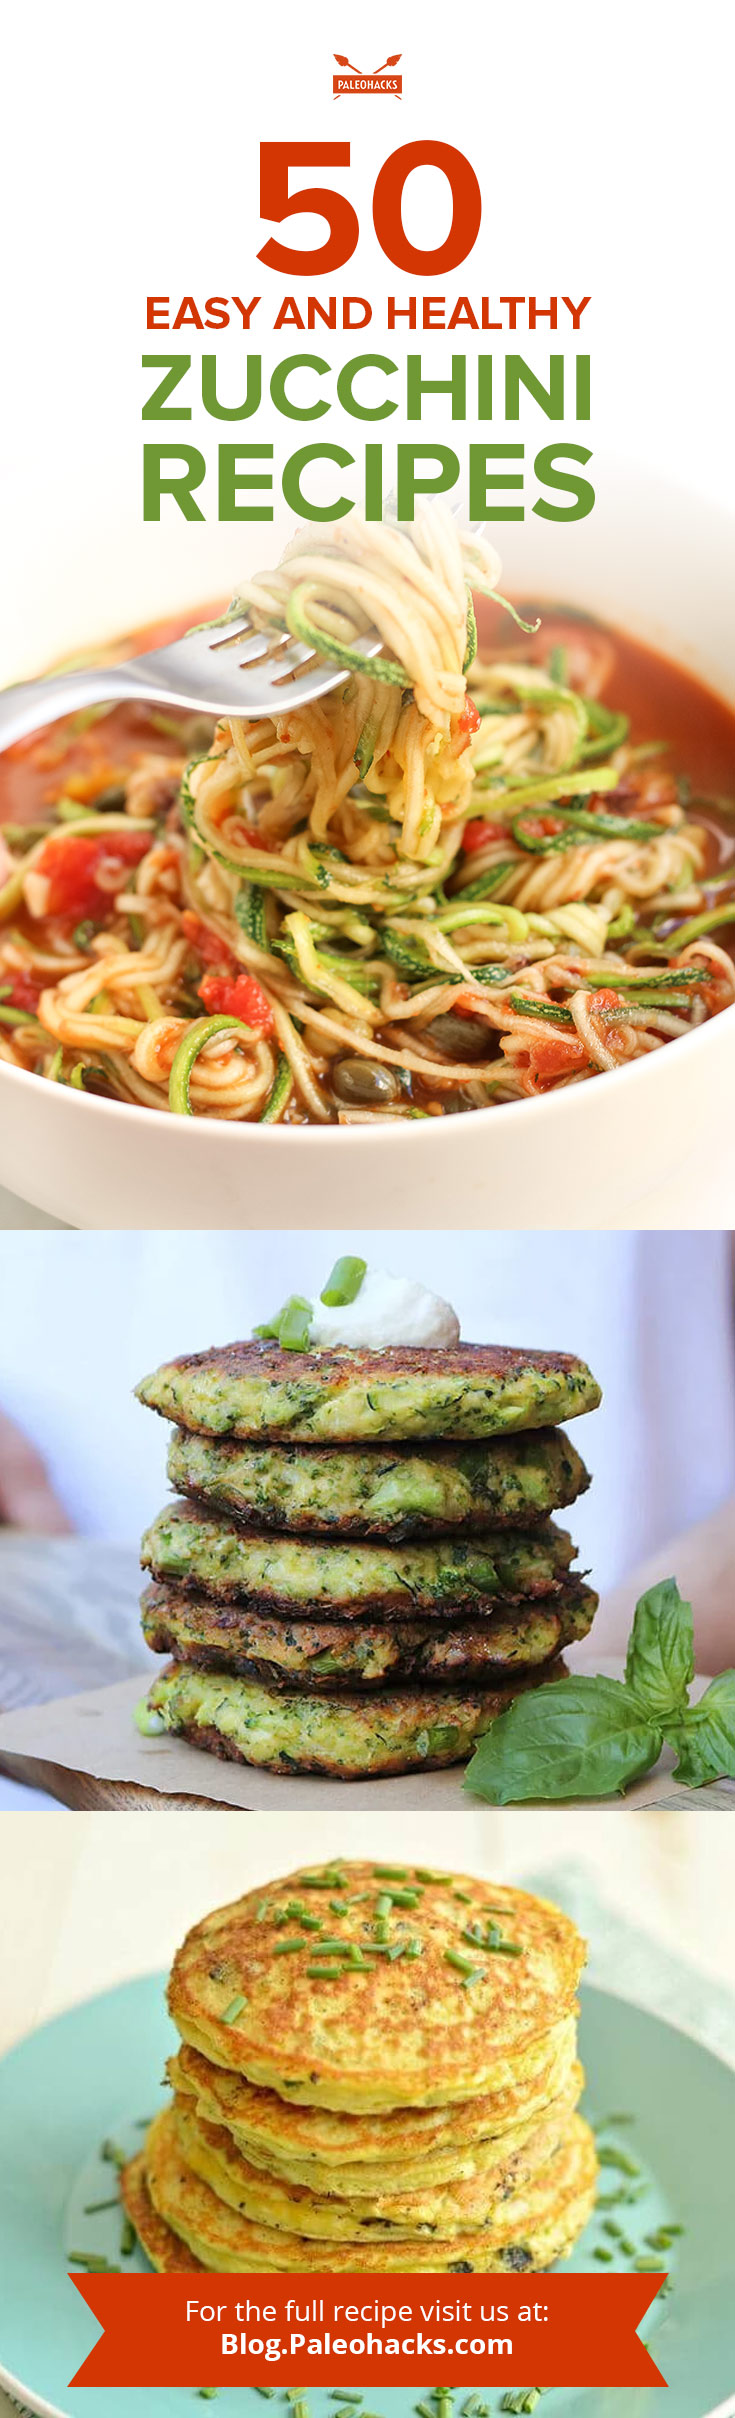 Find out why we’re obsessing over these zucchini recipes in the best possible way. From zoodles to breads, this list has you covered.